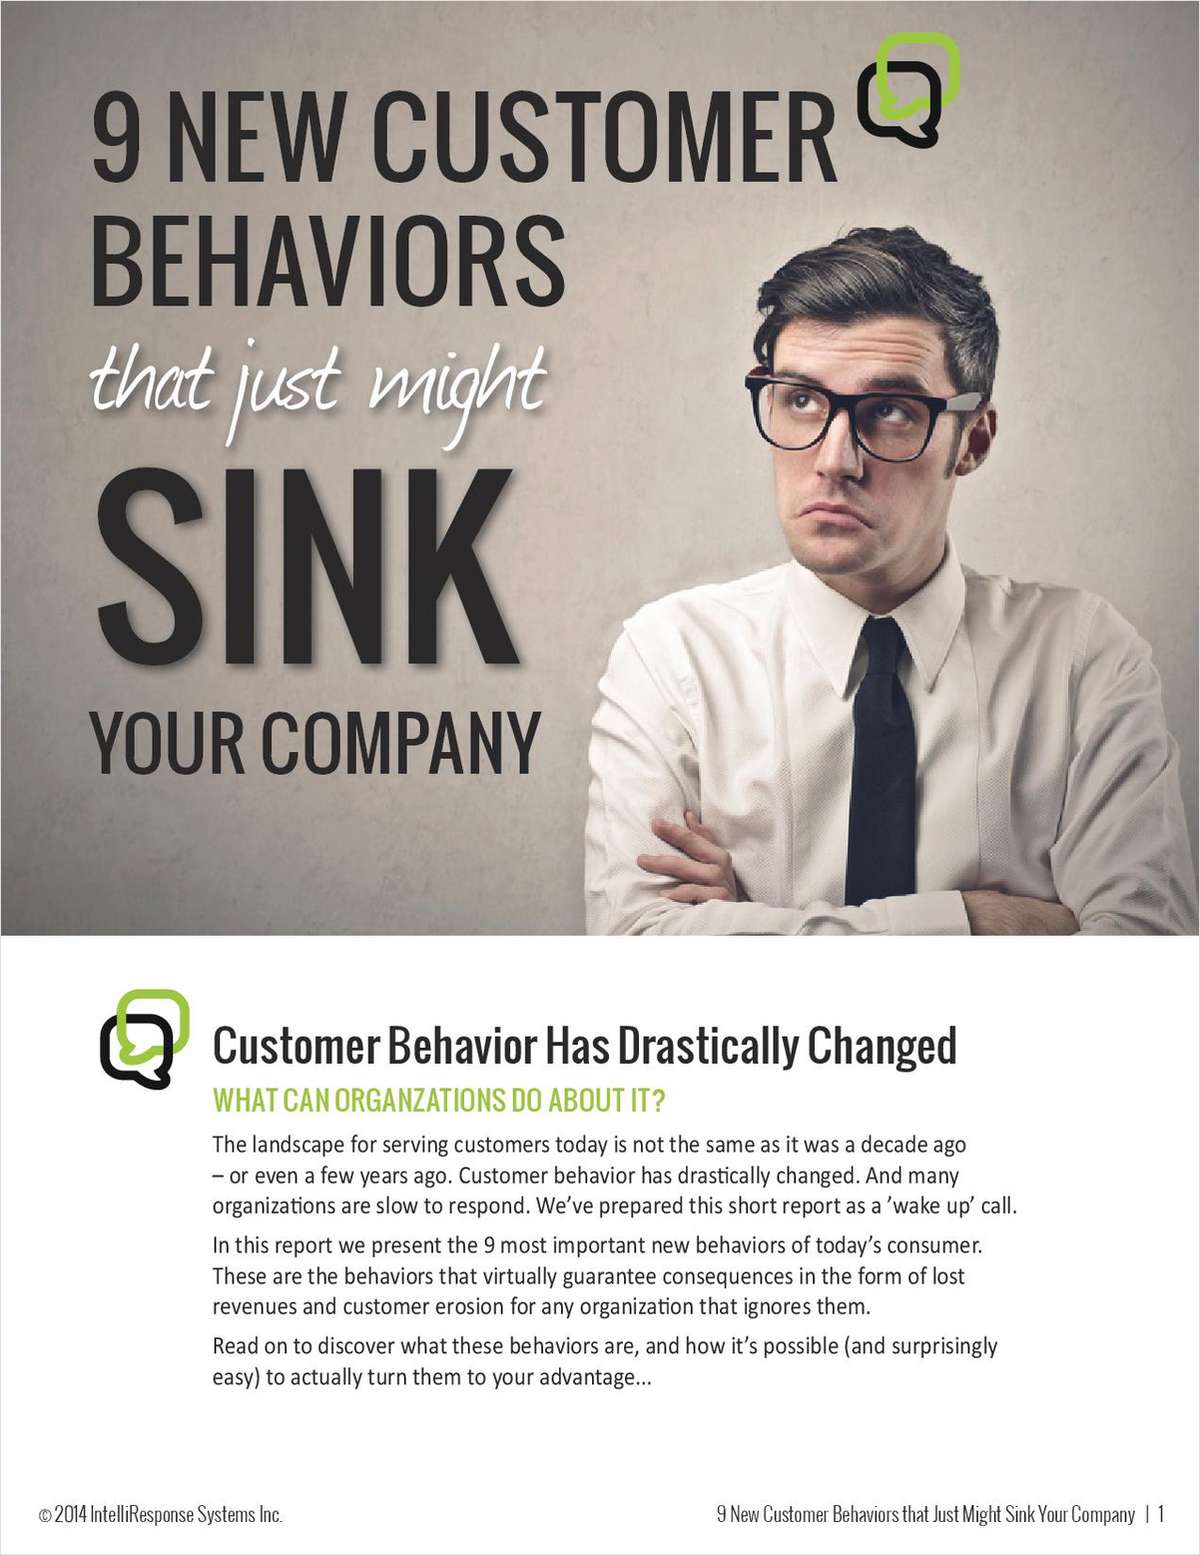 9 New Customer Behaviors that Could Sink Your Company